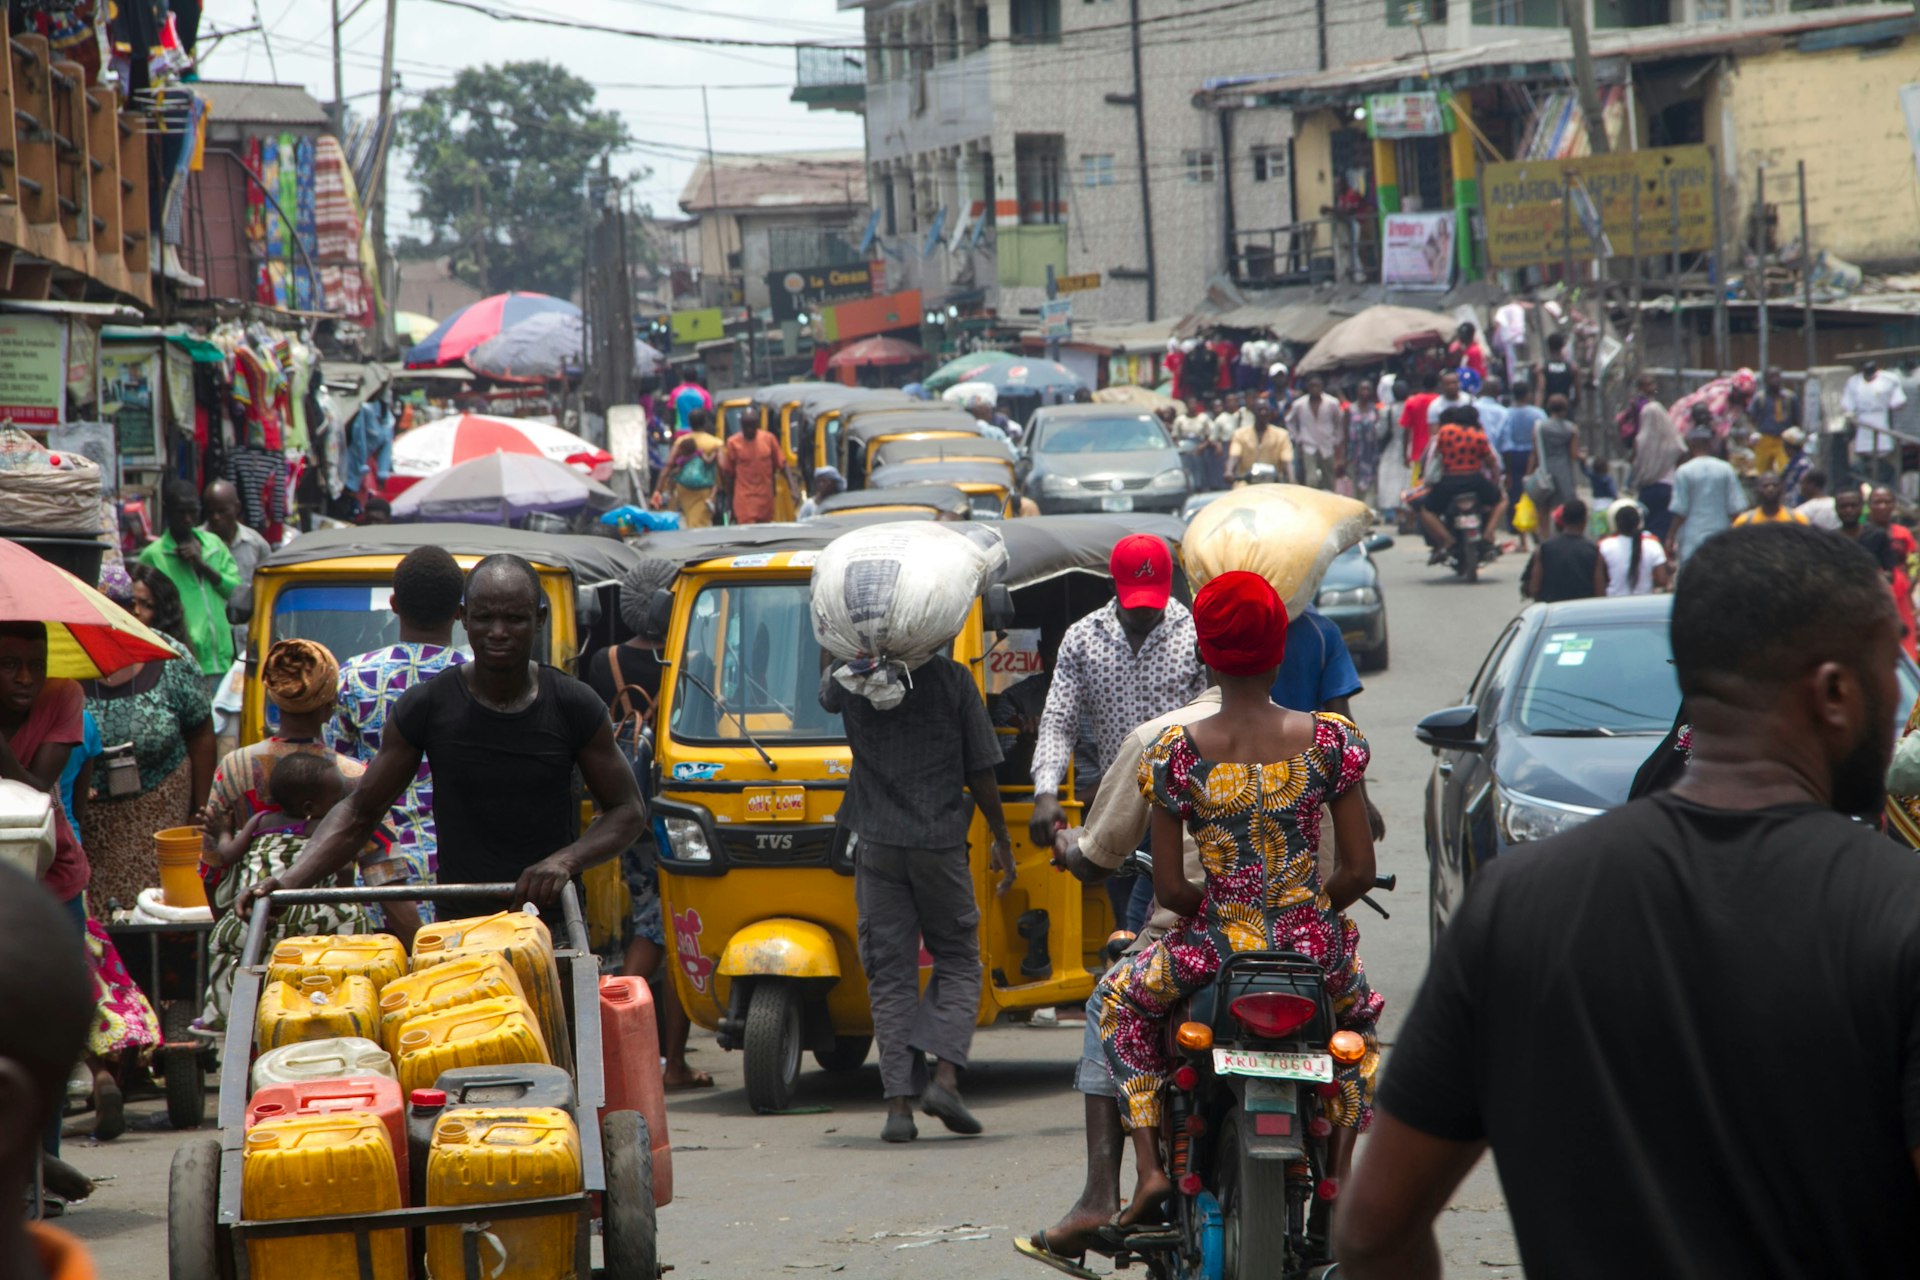 Busy Streets bustling with commercial activity in Ajegunle City, Lagos State Nigeria